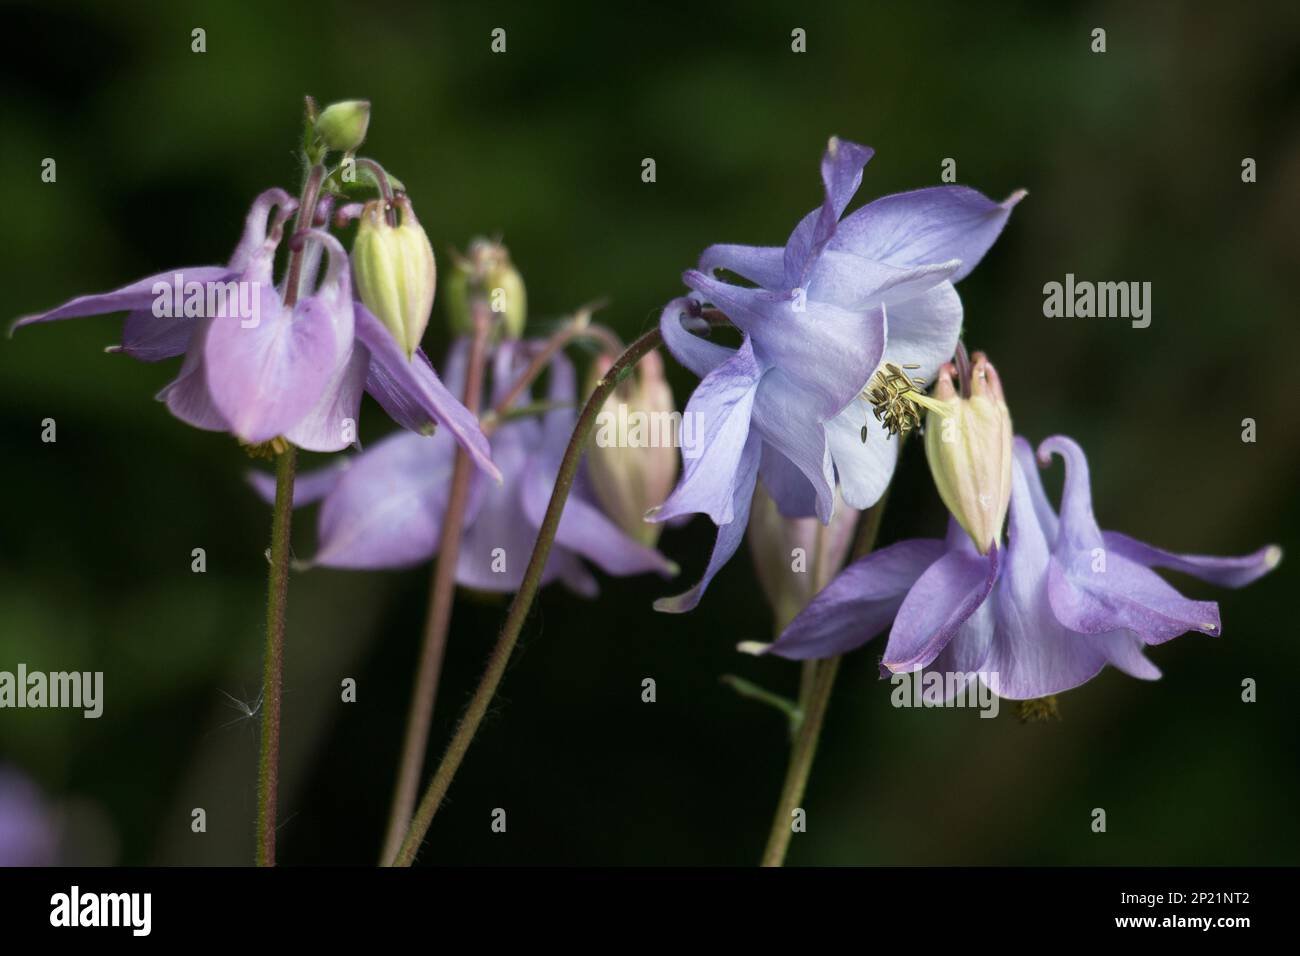 Purple lilac Columbine flowers, Aquilegia vulgaris, Granny’s Bonnets with spurred petals, blooming in summer, on a natural dark green background Stock Photo